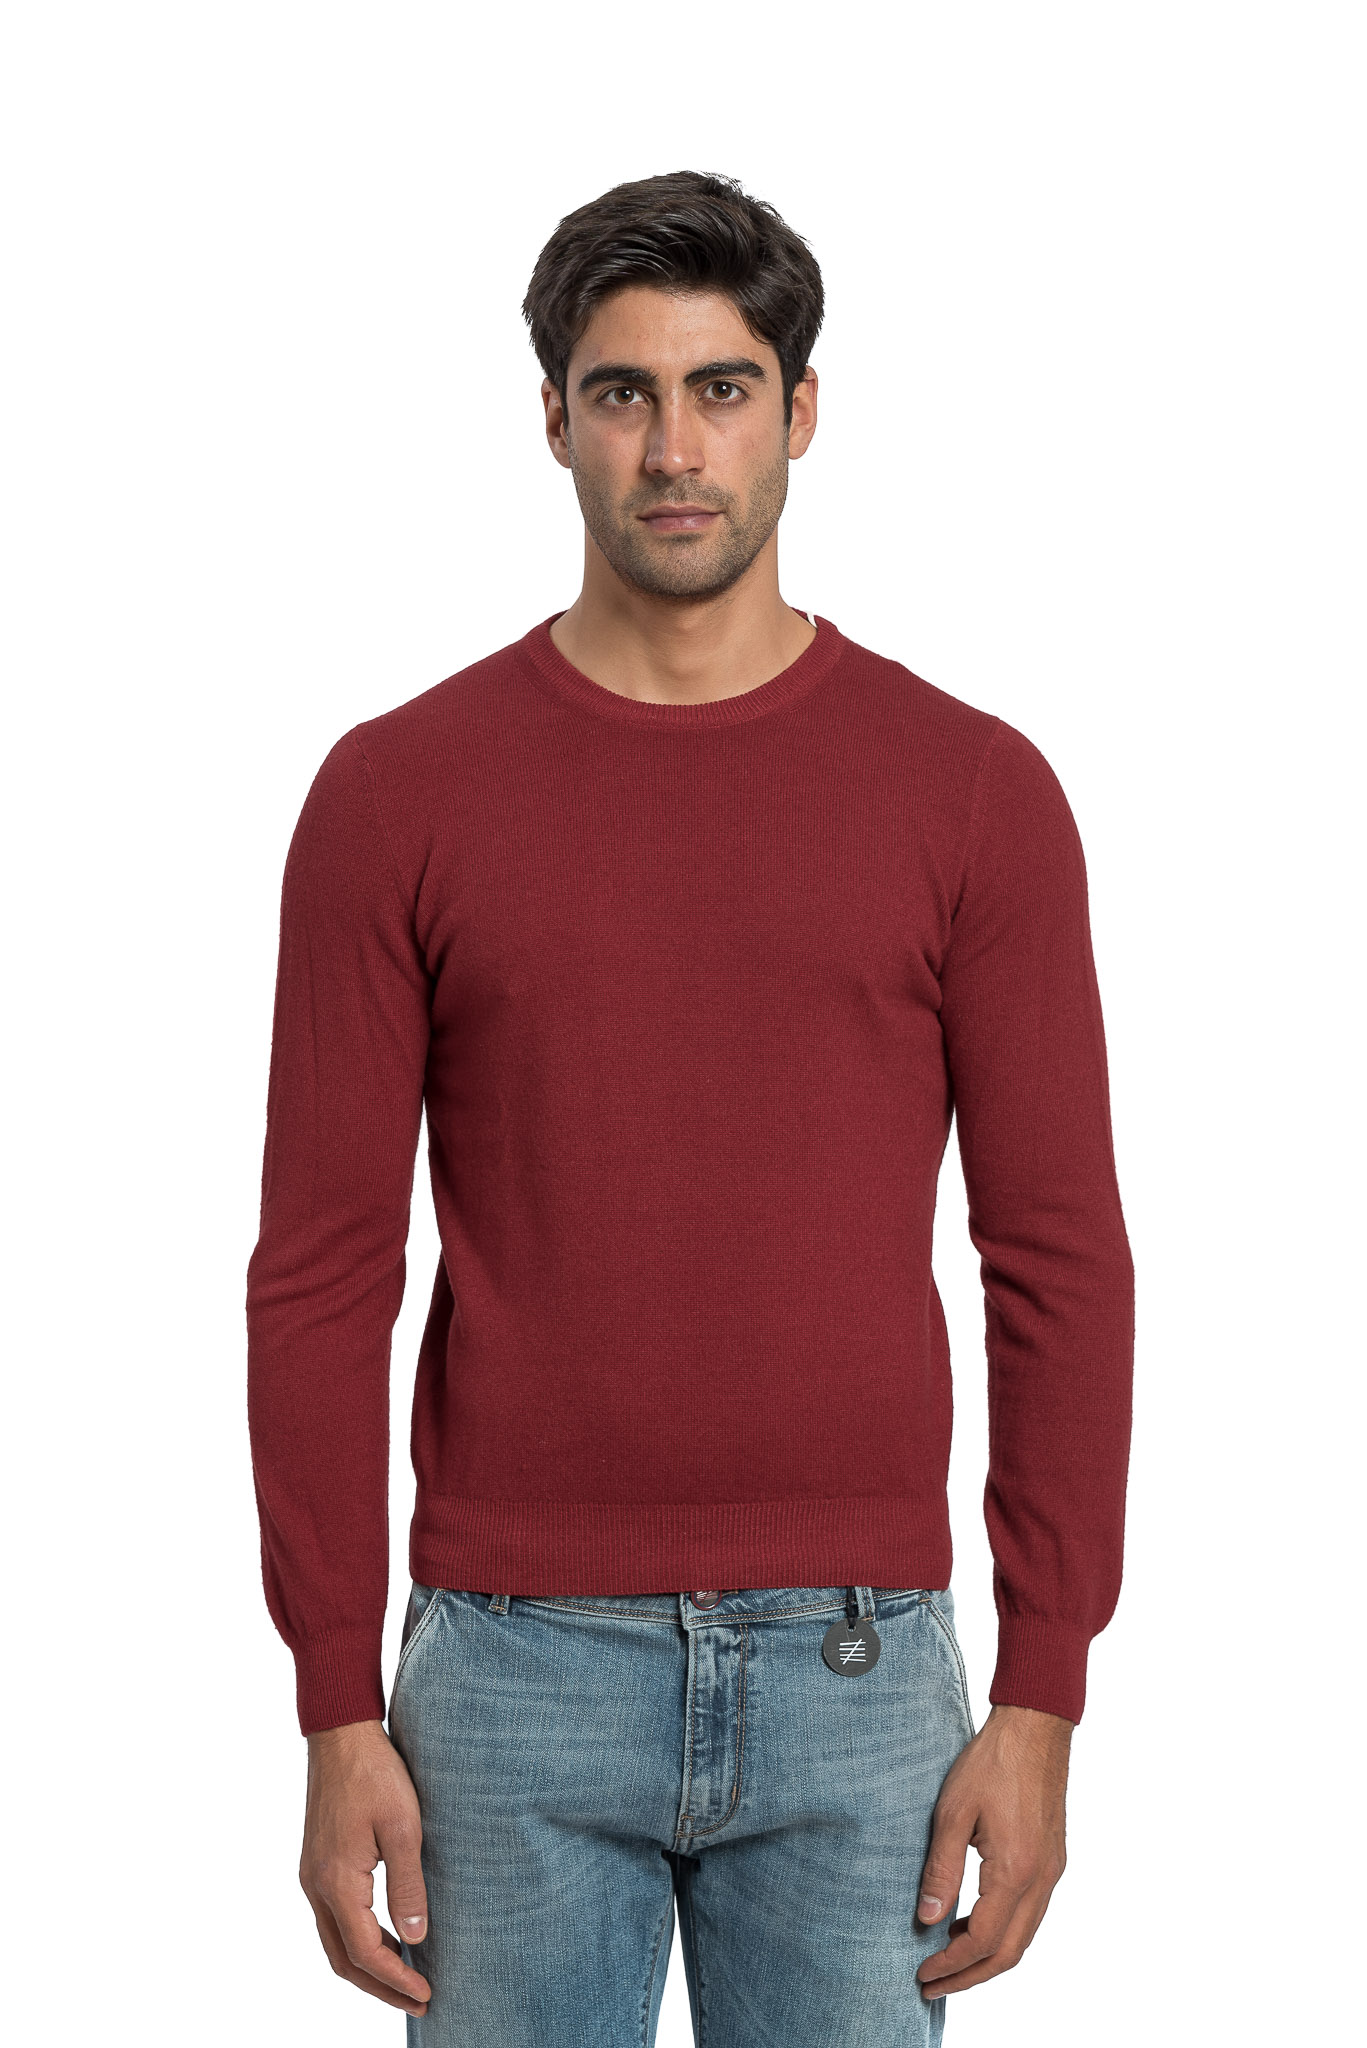 280$ PANICALE CASHMERE Red Sweater Merino Wool Cashmere Made in Italy ...